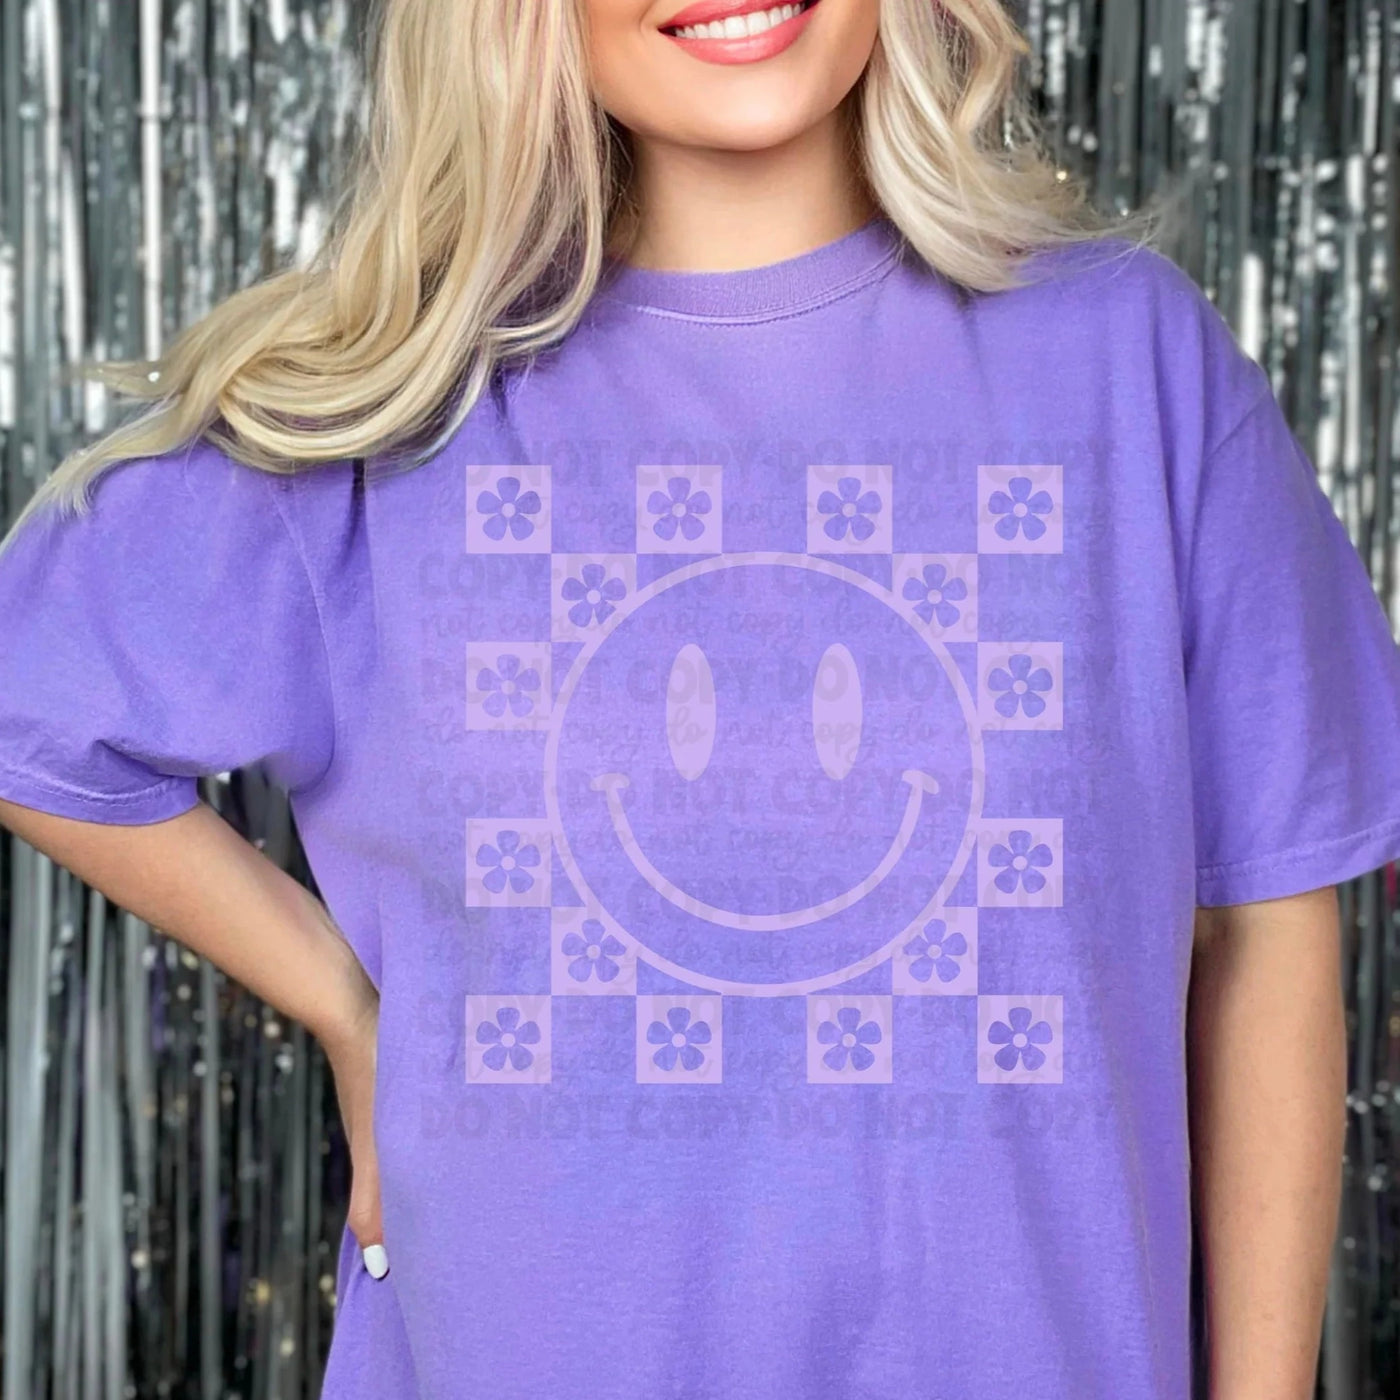 "Checkered Happy Face" T-shirt (shown on Comfort Colors "Violet")